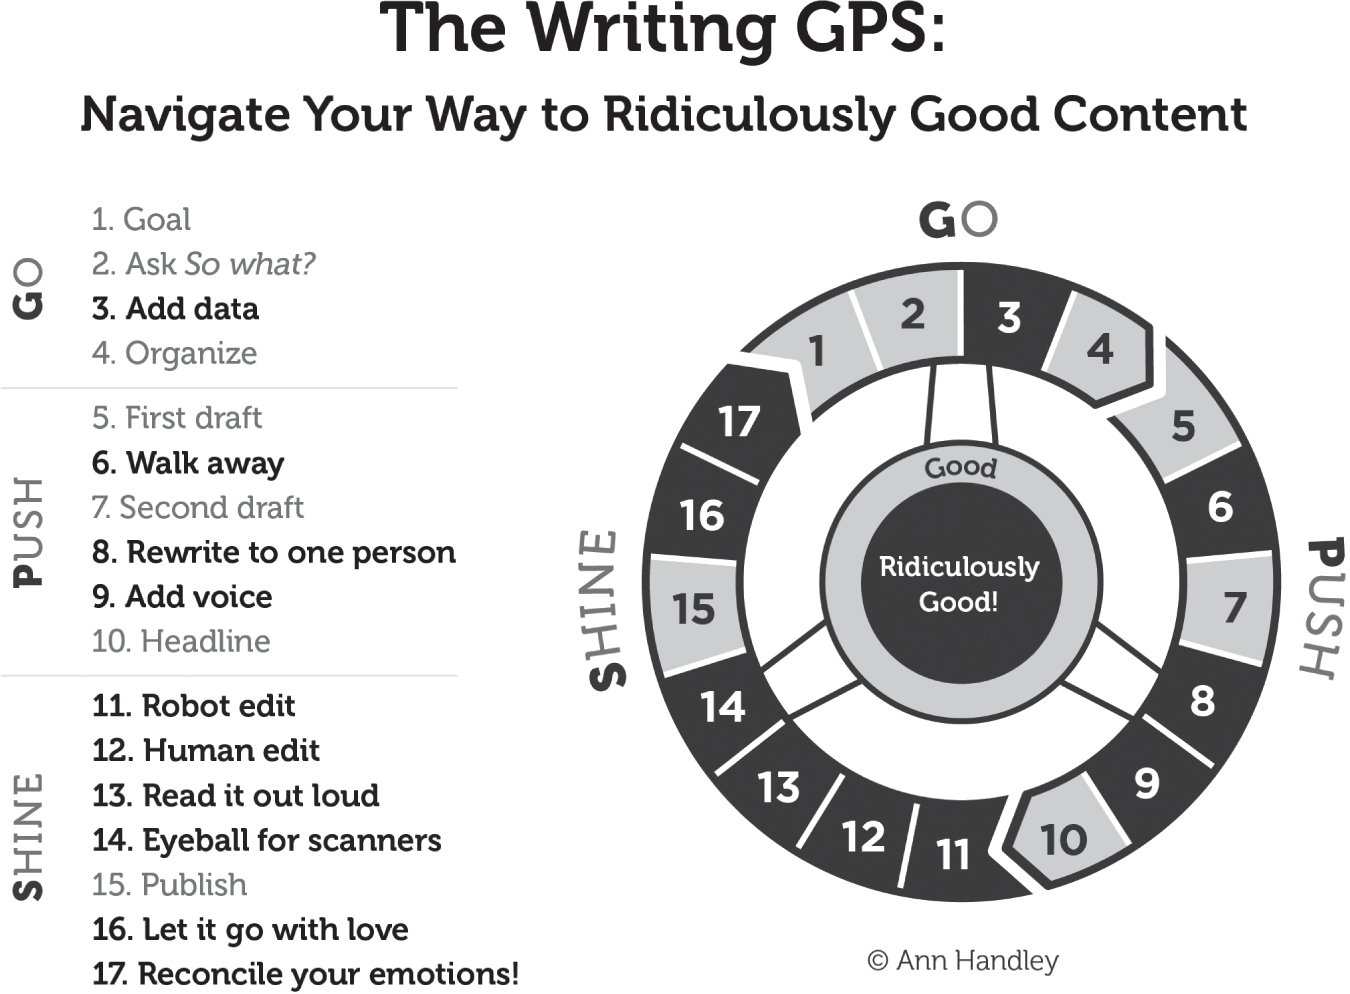 Schematic illustration of the Writing GPS.